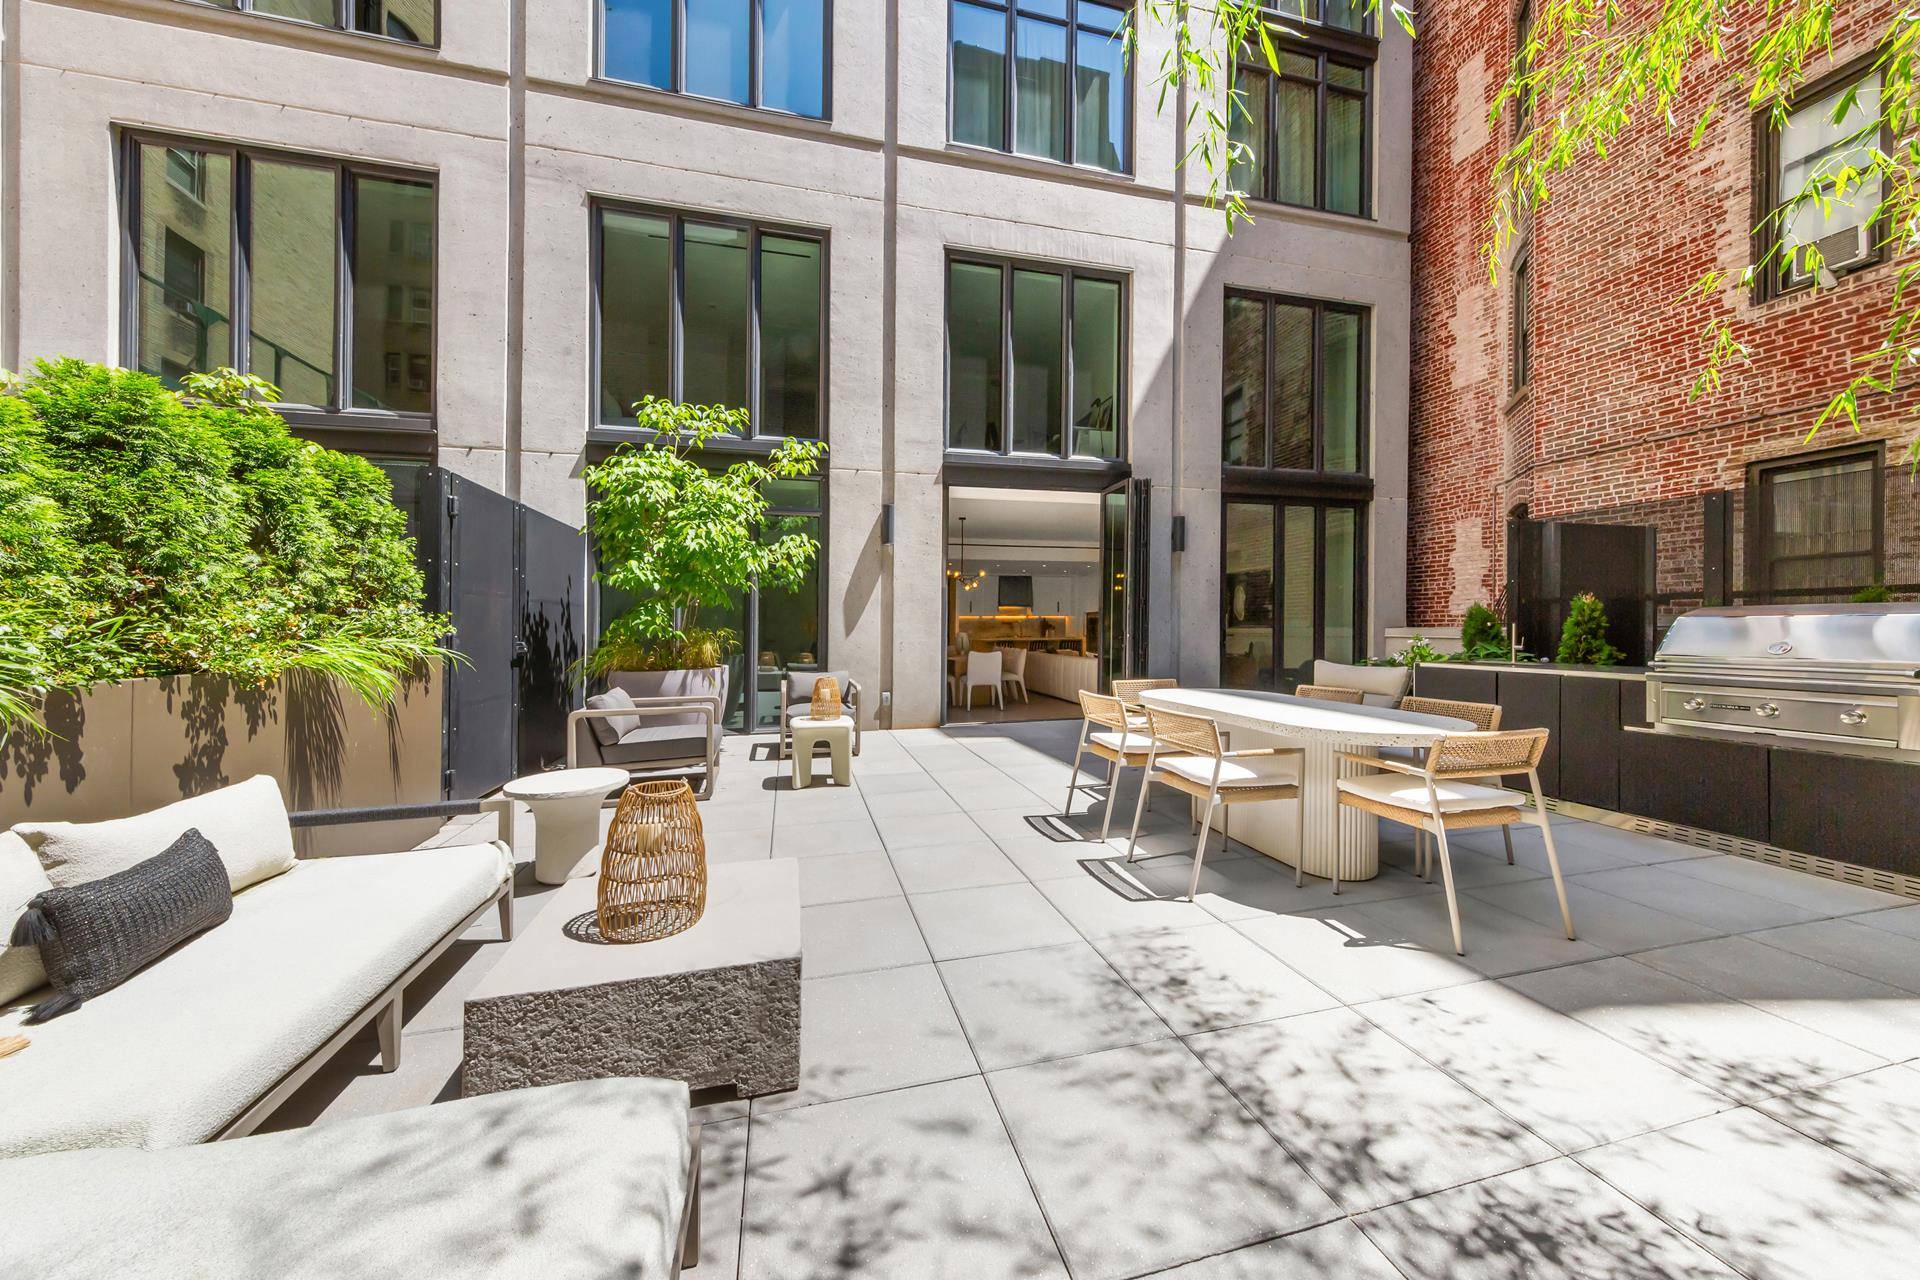 IMMEDIATE OCCUPANCYThis spacious duplex four bedroom, four bath residence features a 952 square foot private terrace positioned directly off the living room, and kitchen embodies indoor outdoor living.